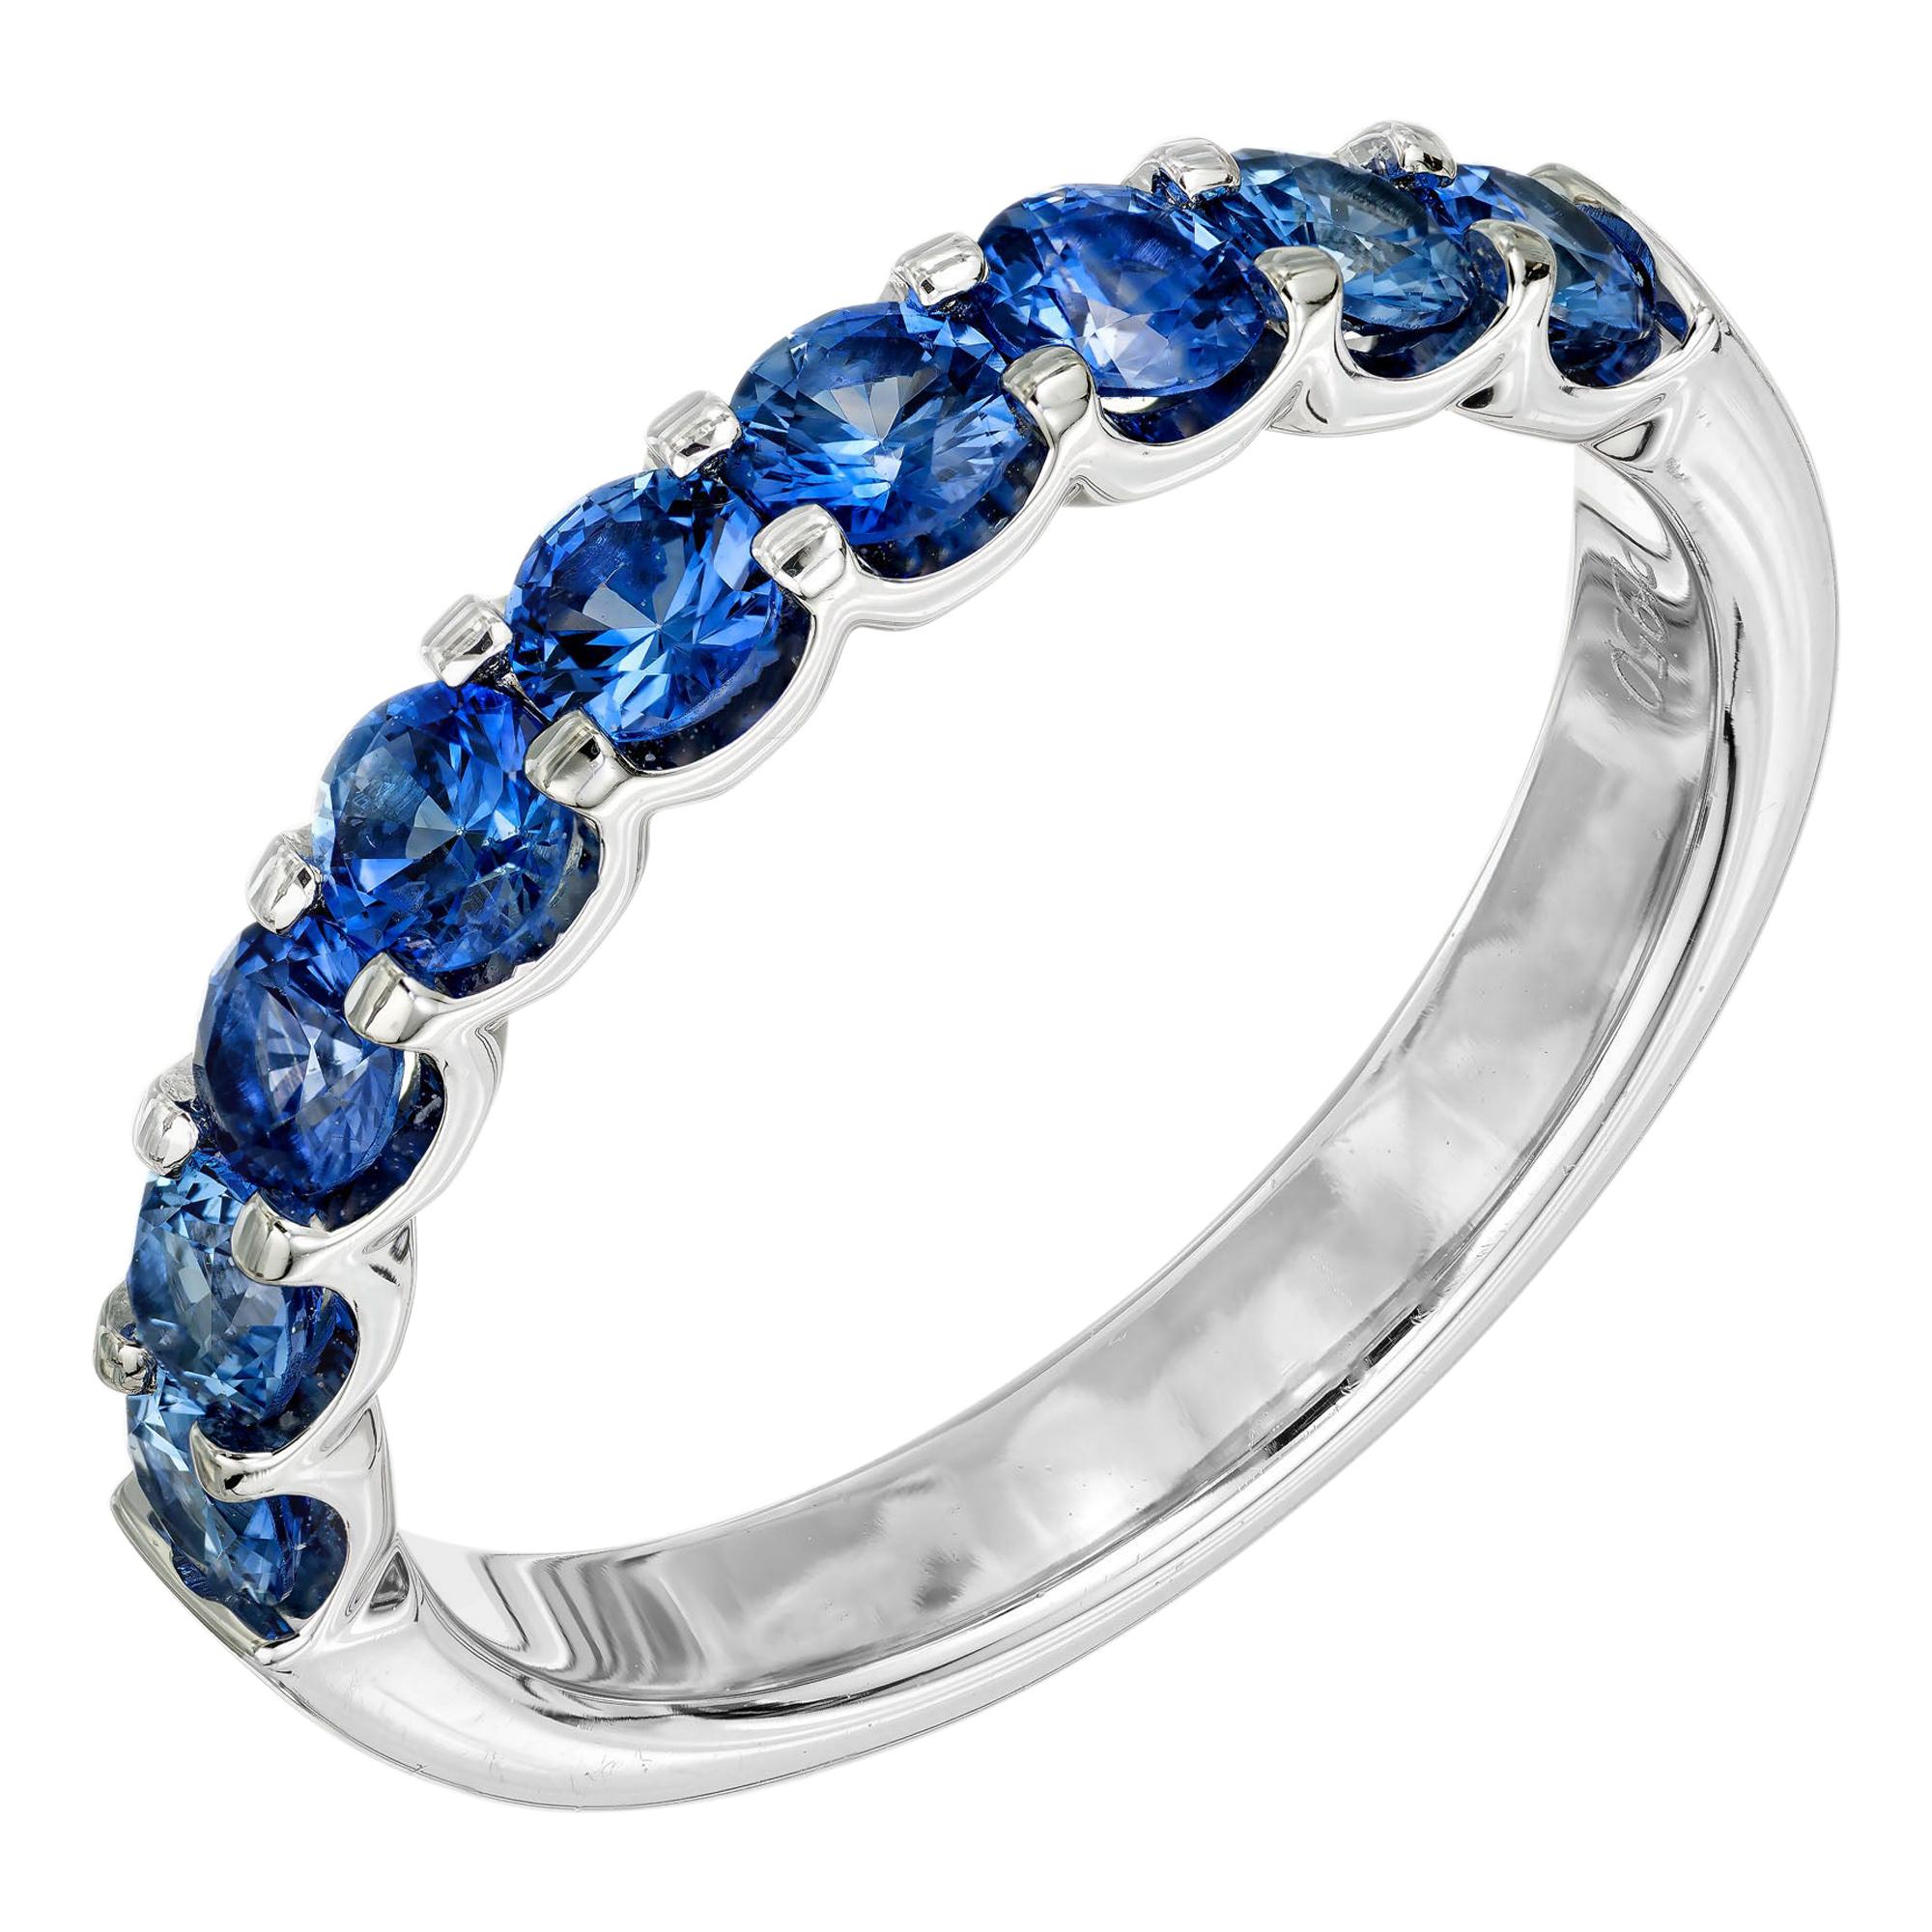 Peter Suchy 1.12 Carat Blue Sapphire Platinum Wedding Band Ring For Sale